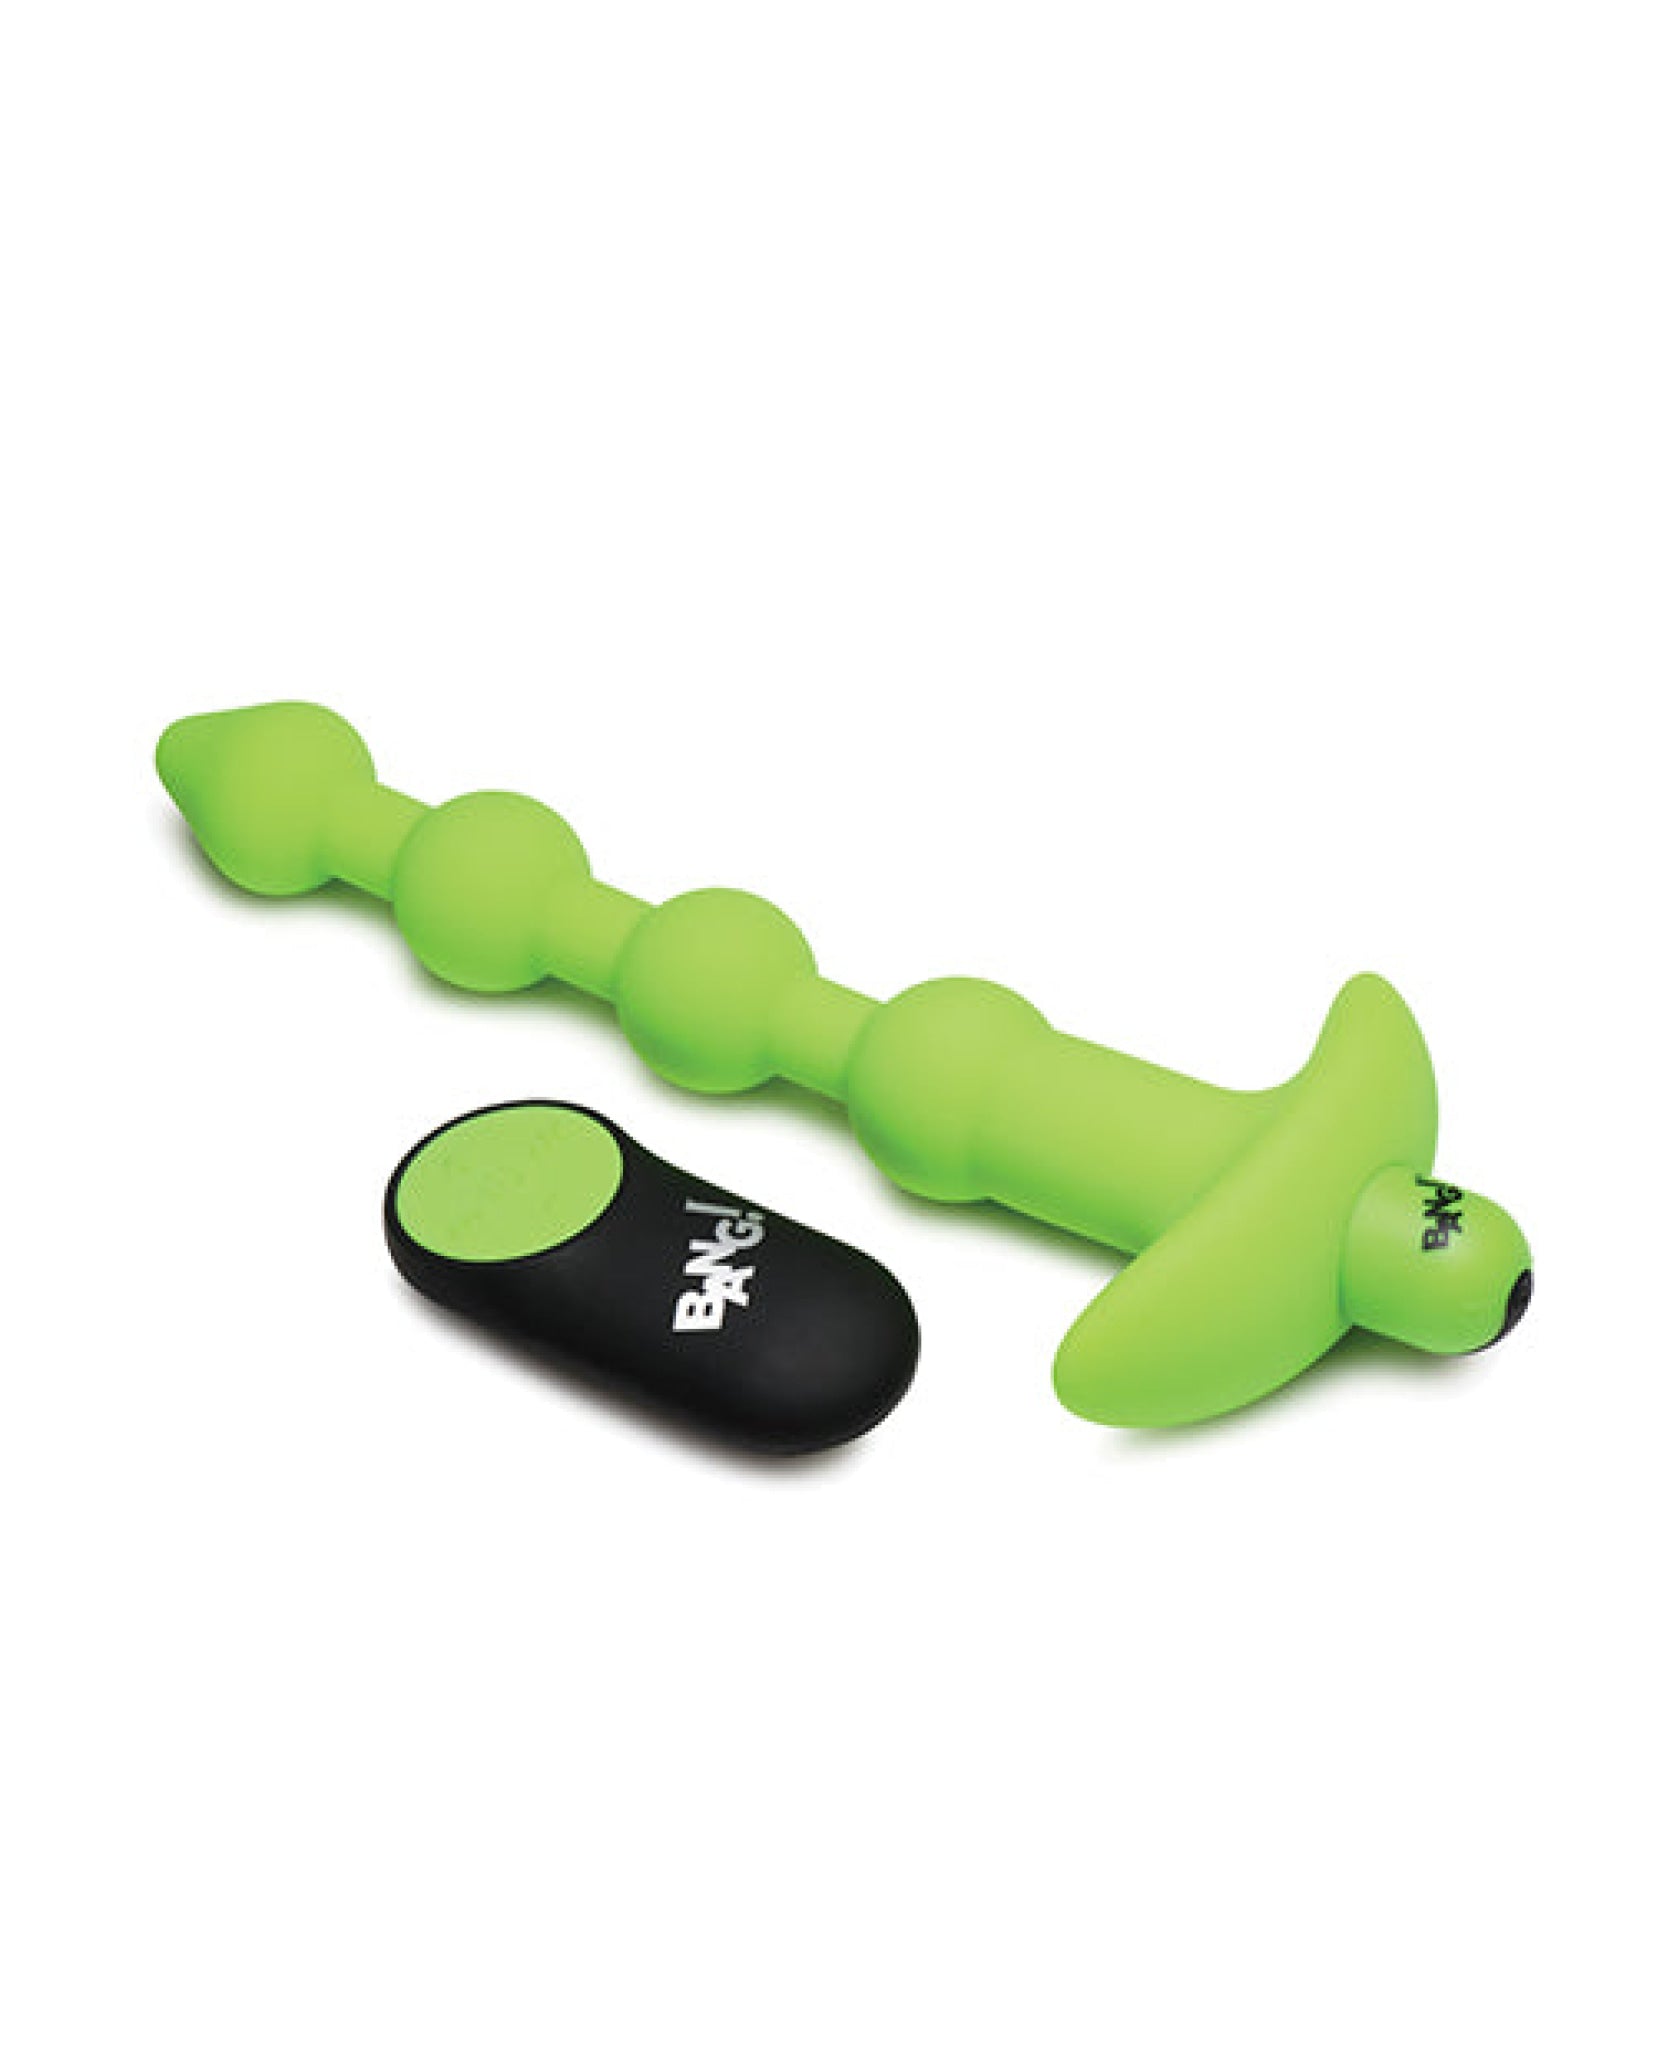 Bang! Glow in the Dark 28X Remote Controlled Anal Beads Xr LLC